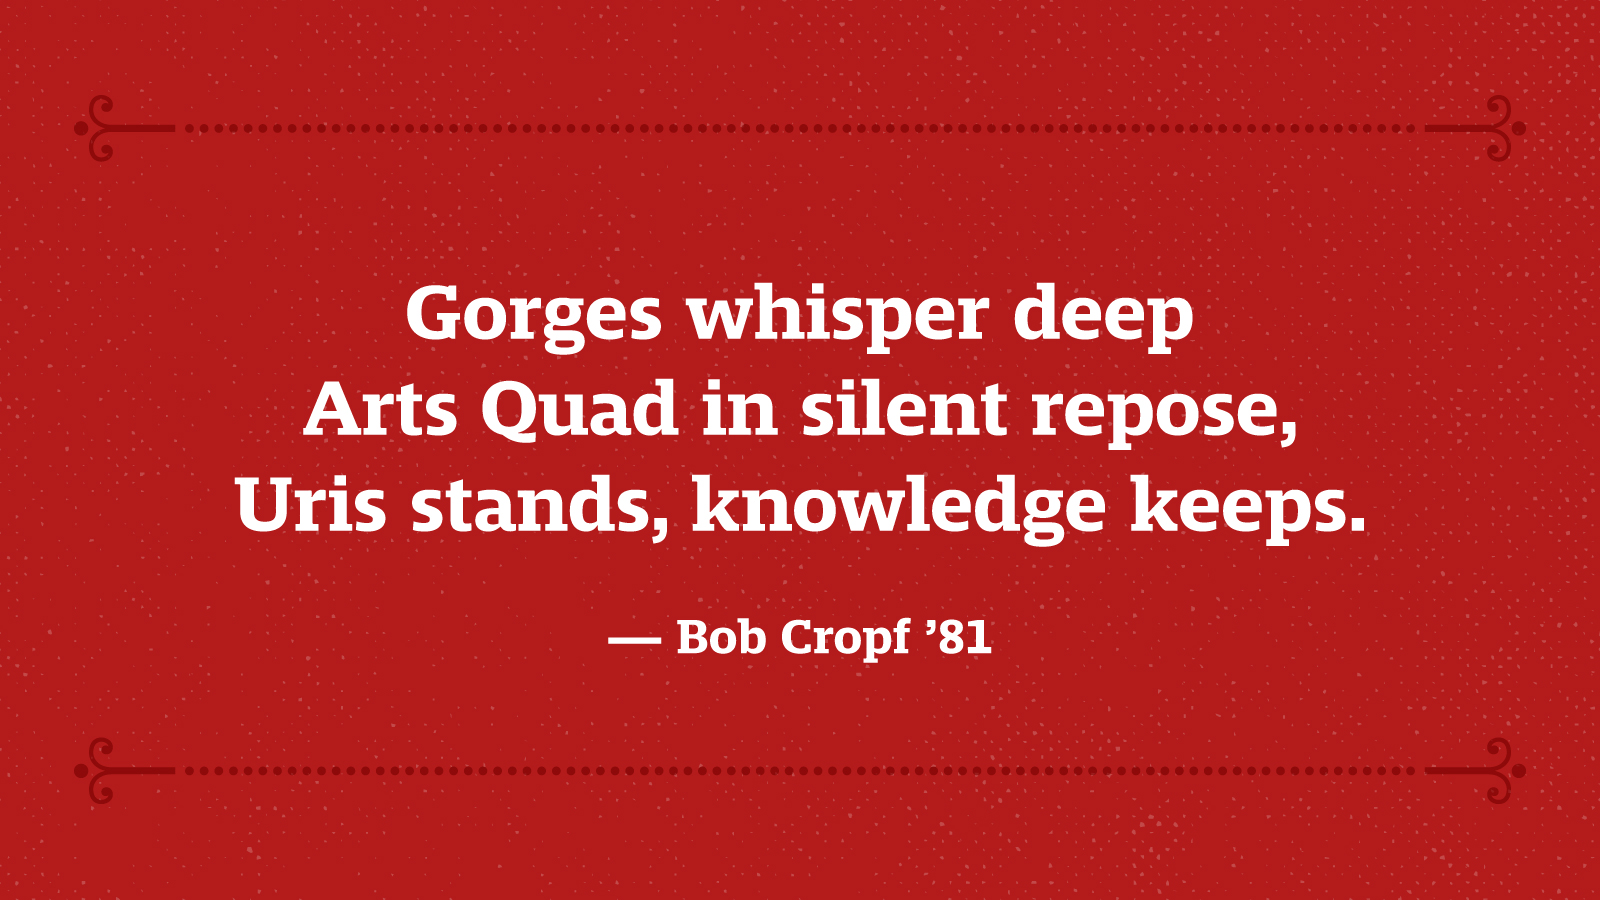 Gorges whisper deep, Arts Quad in silent repose, Uris stands, knowledge keeps. — Bob Cropf ’81